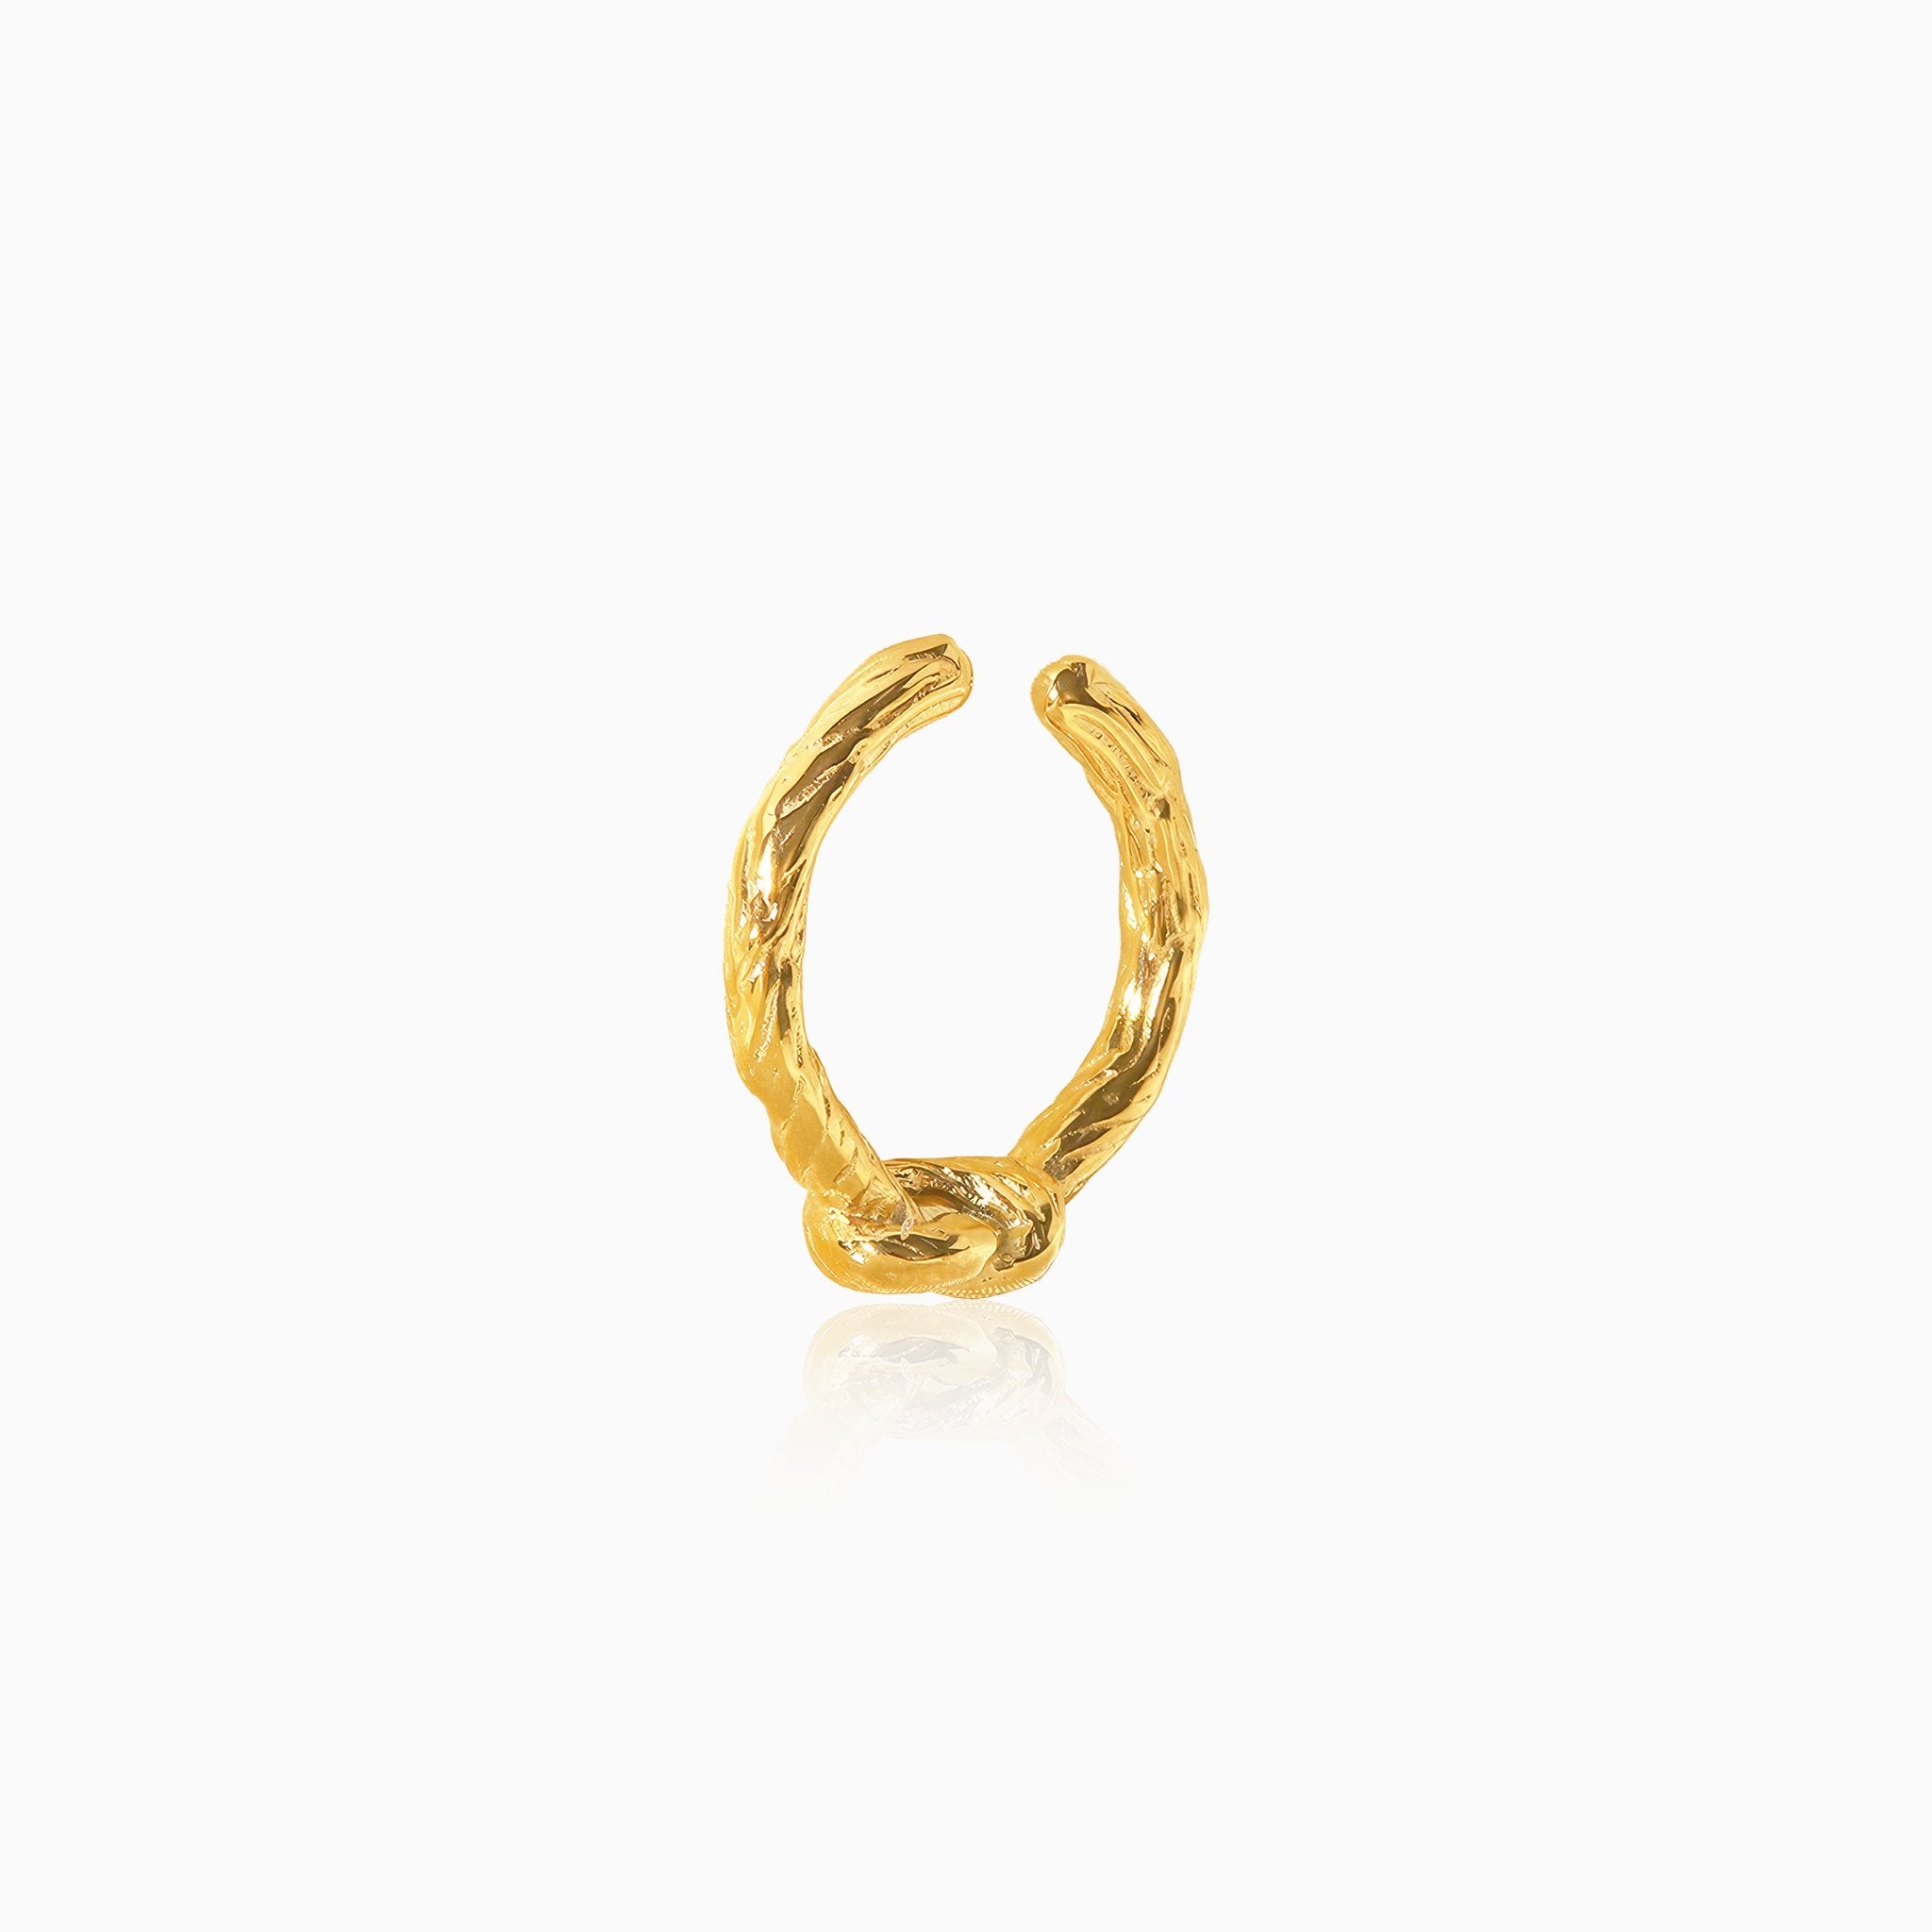 Irregular Texture Knot Open Ring - Nobbier - Ring - 18K Gold And Titanium PVD Coated Jewelry